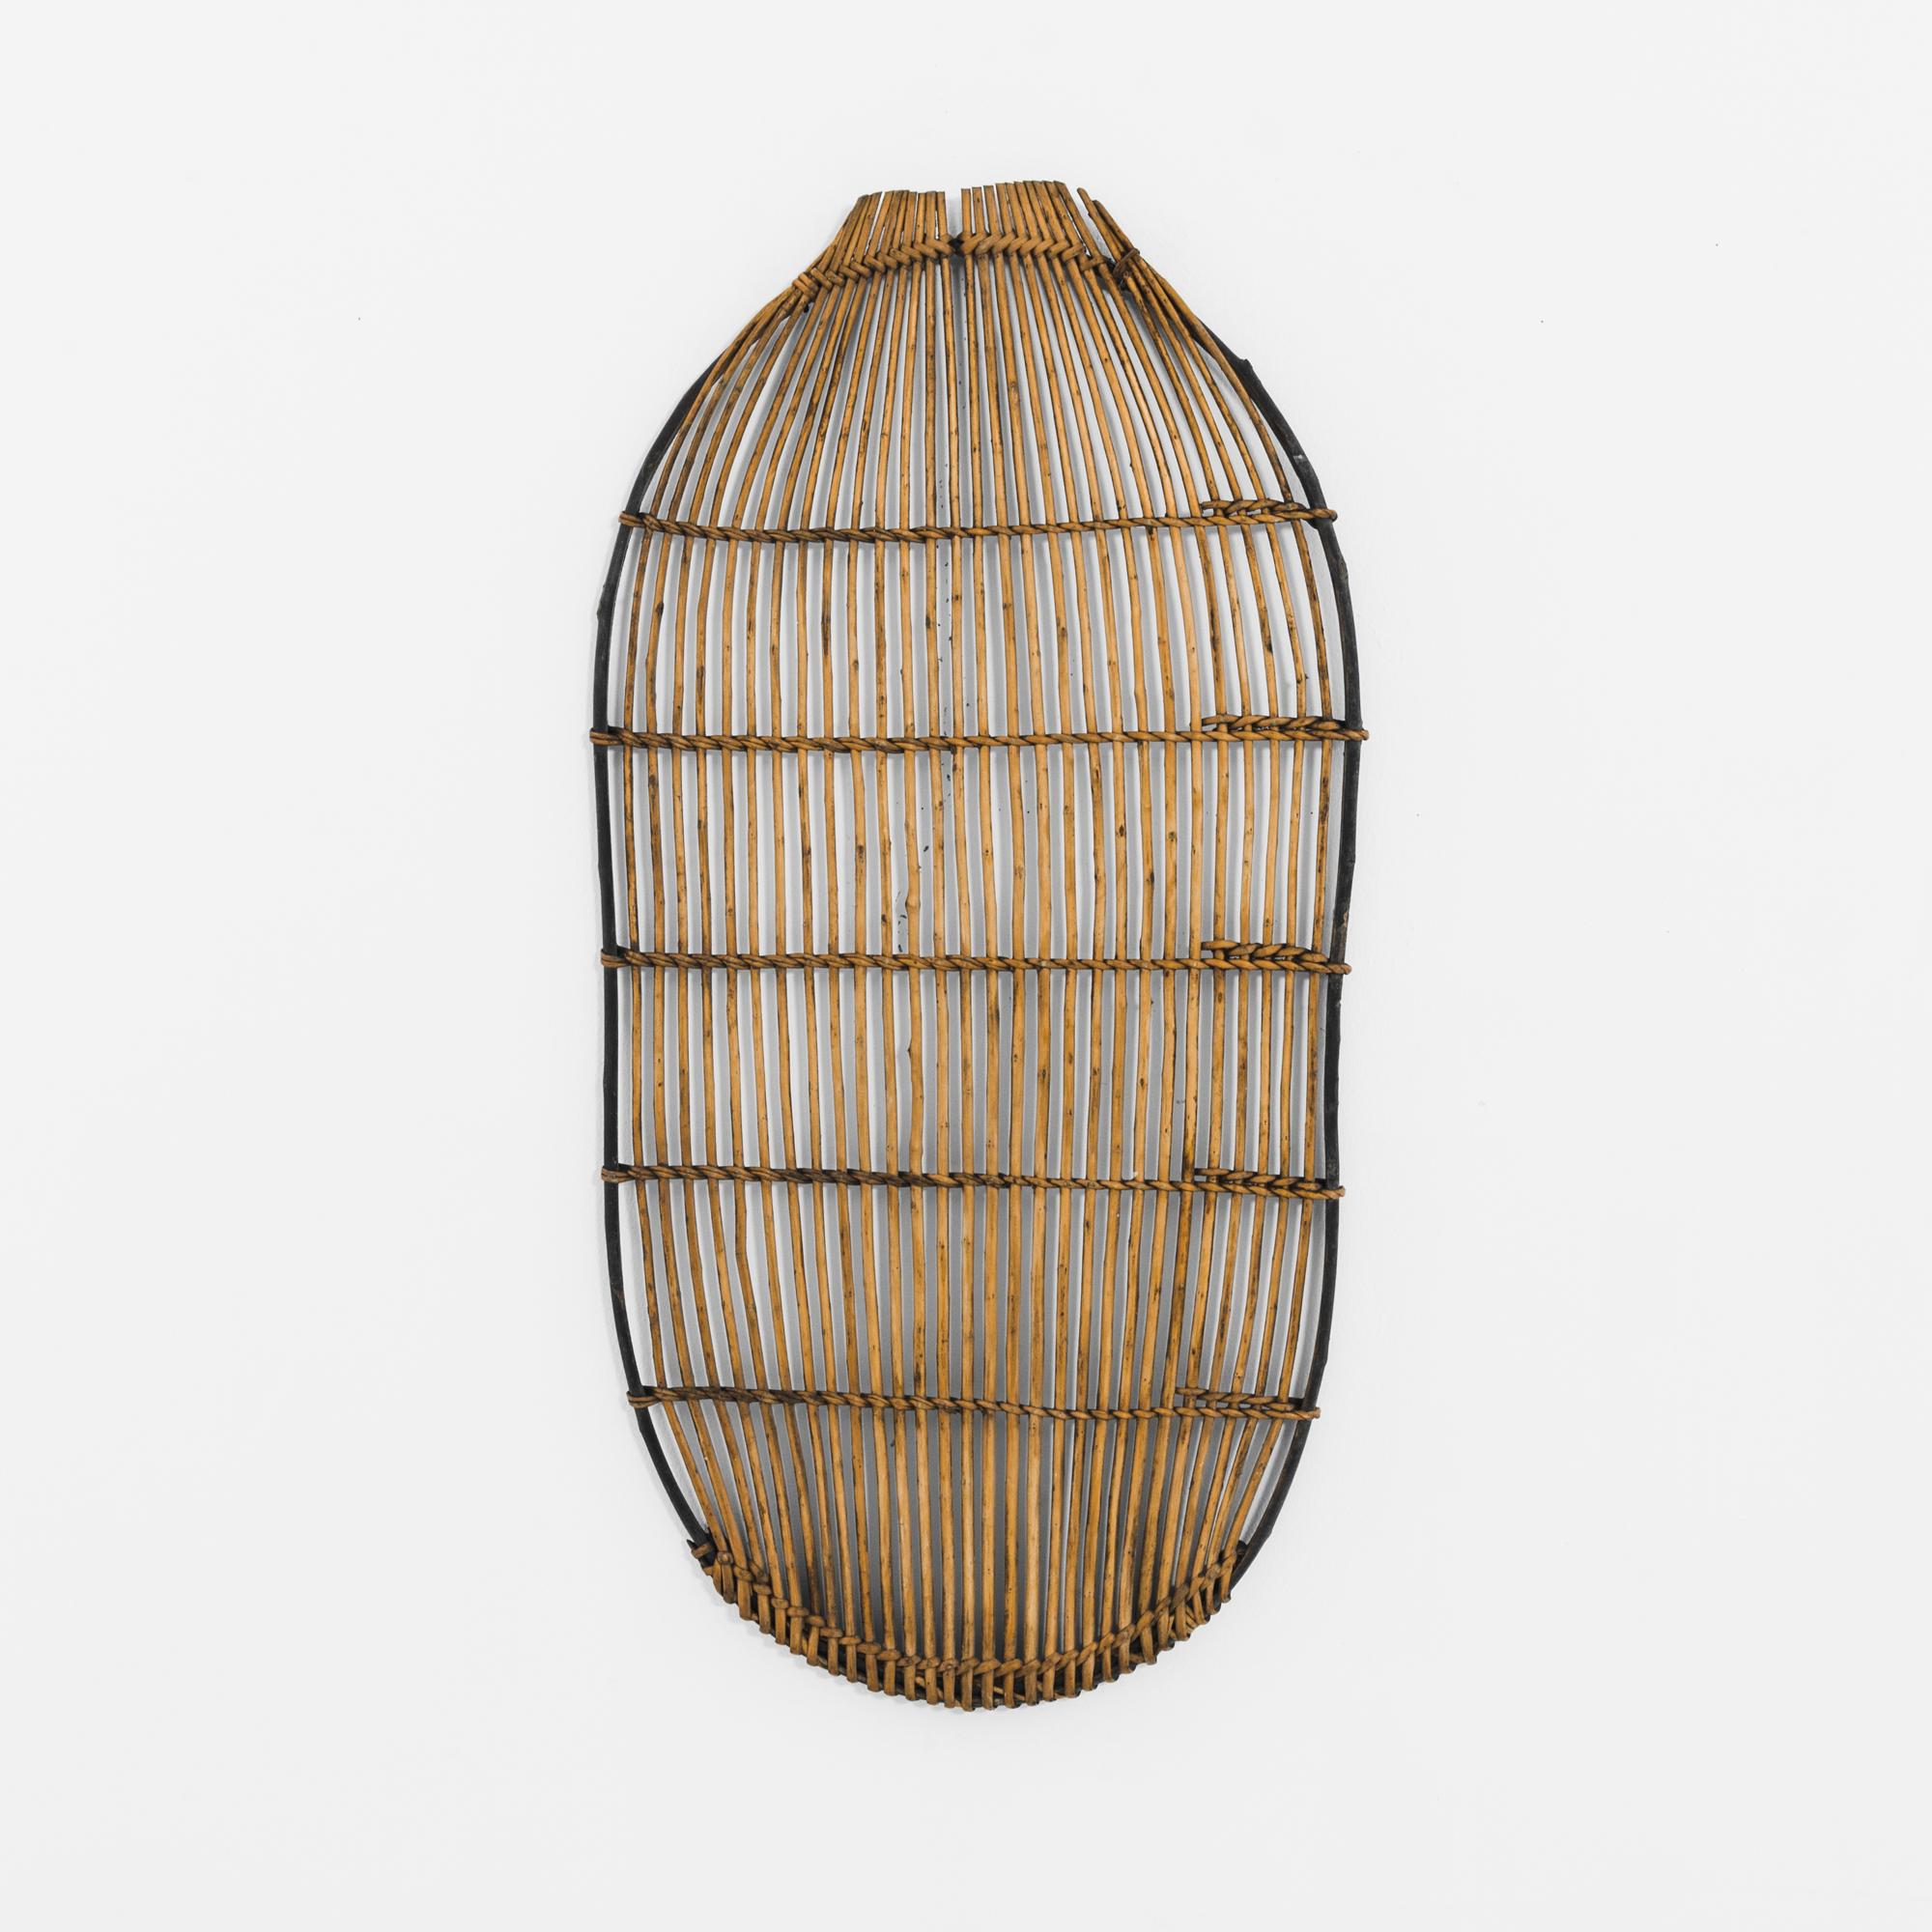 A wooden wall decoration from 1880s France. An oval frame is woven with long pieces of wicker cane, creating an open-weave lattice. The organic lines of the shape and the natural finish of the materials create an aesthetic both rustic and abstract: